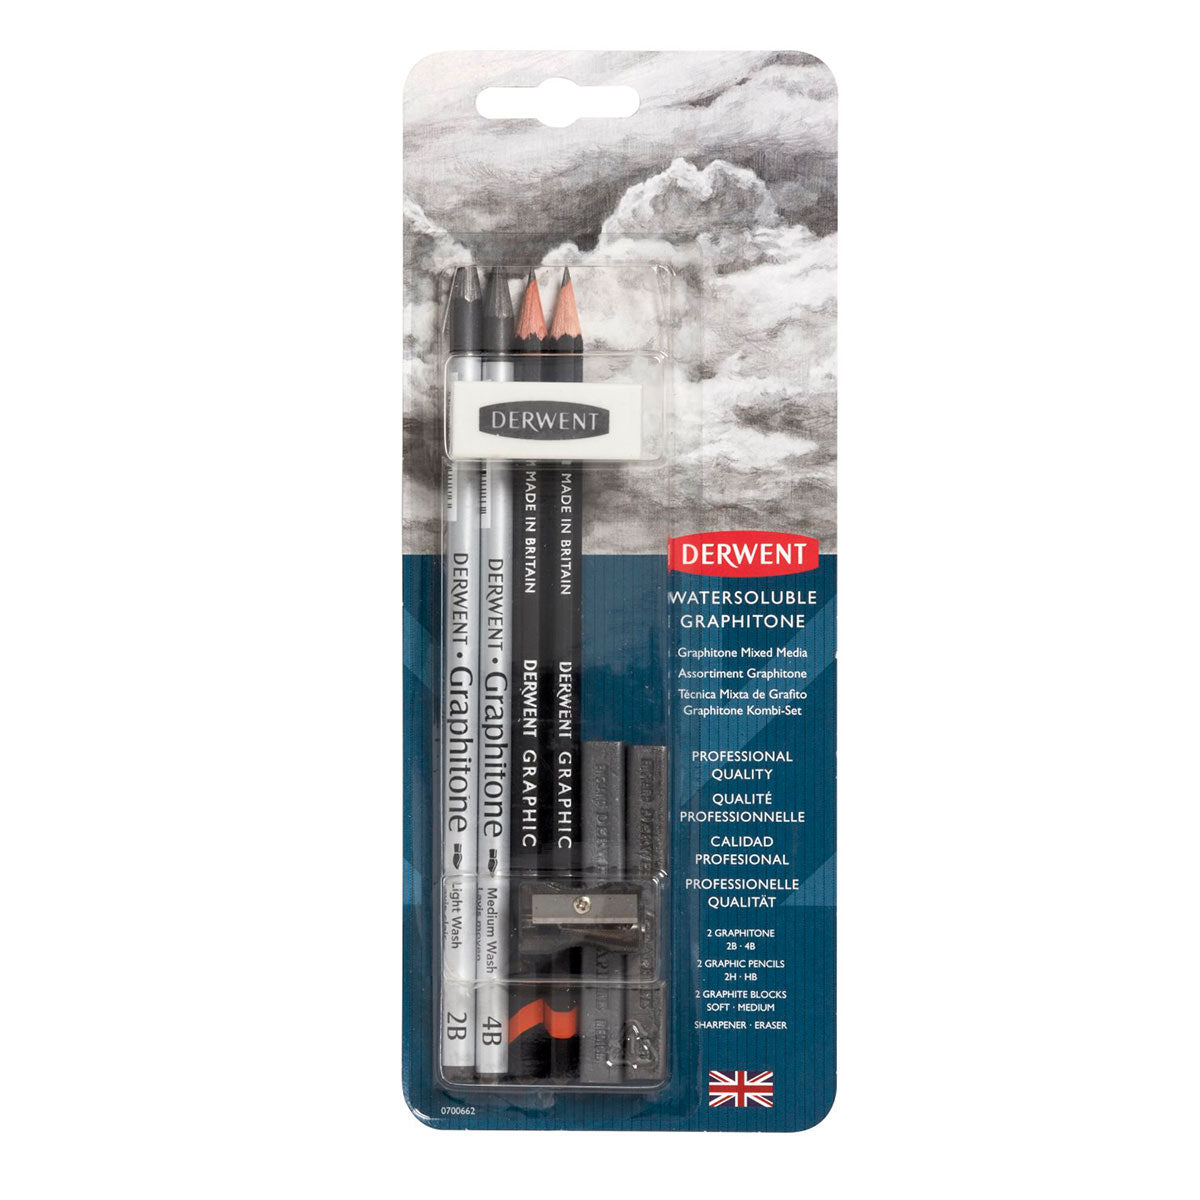 Derwent - Graphitone Watersoluble Sketching crayons mix médias pack.